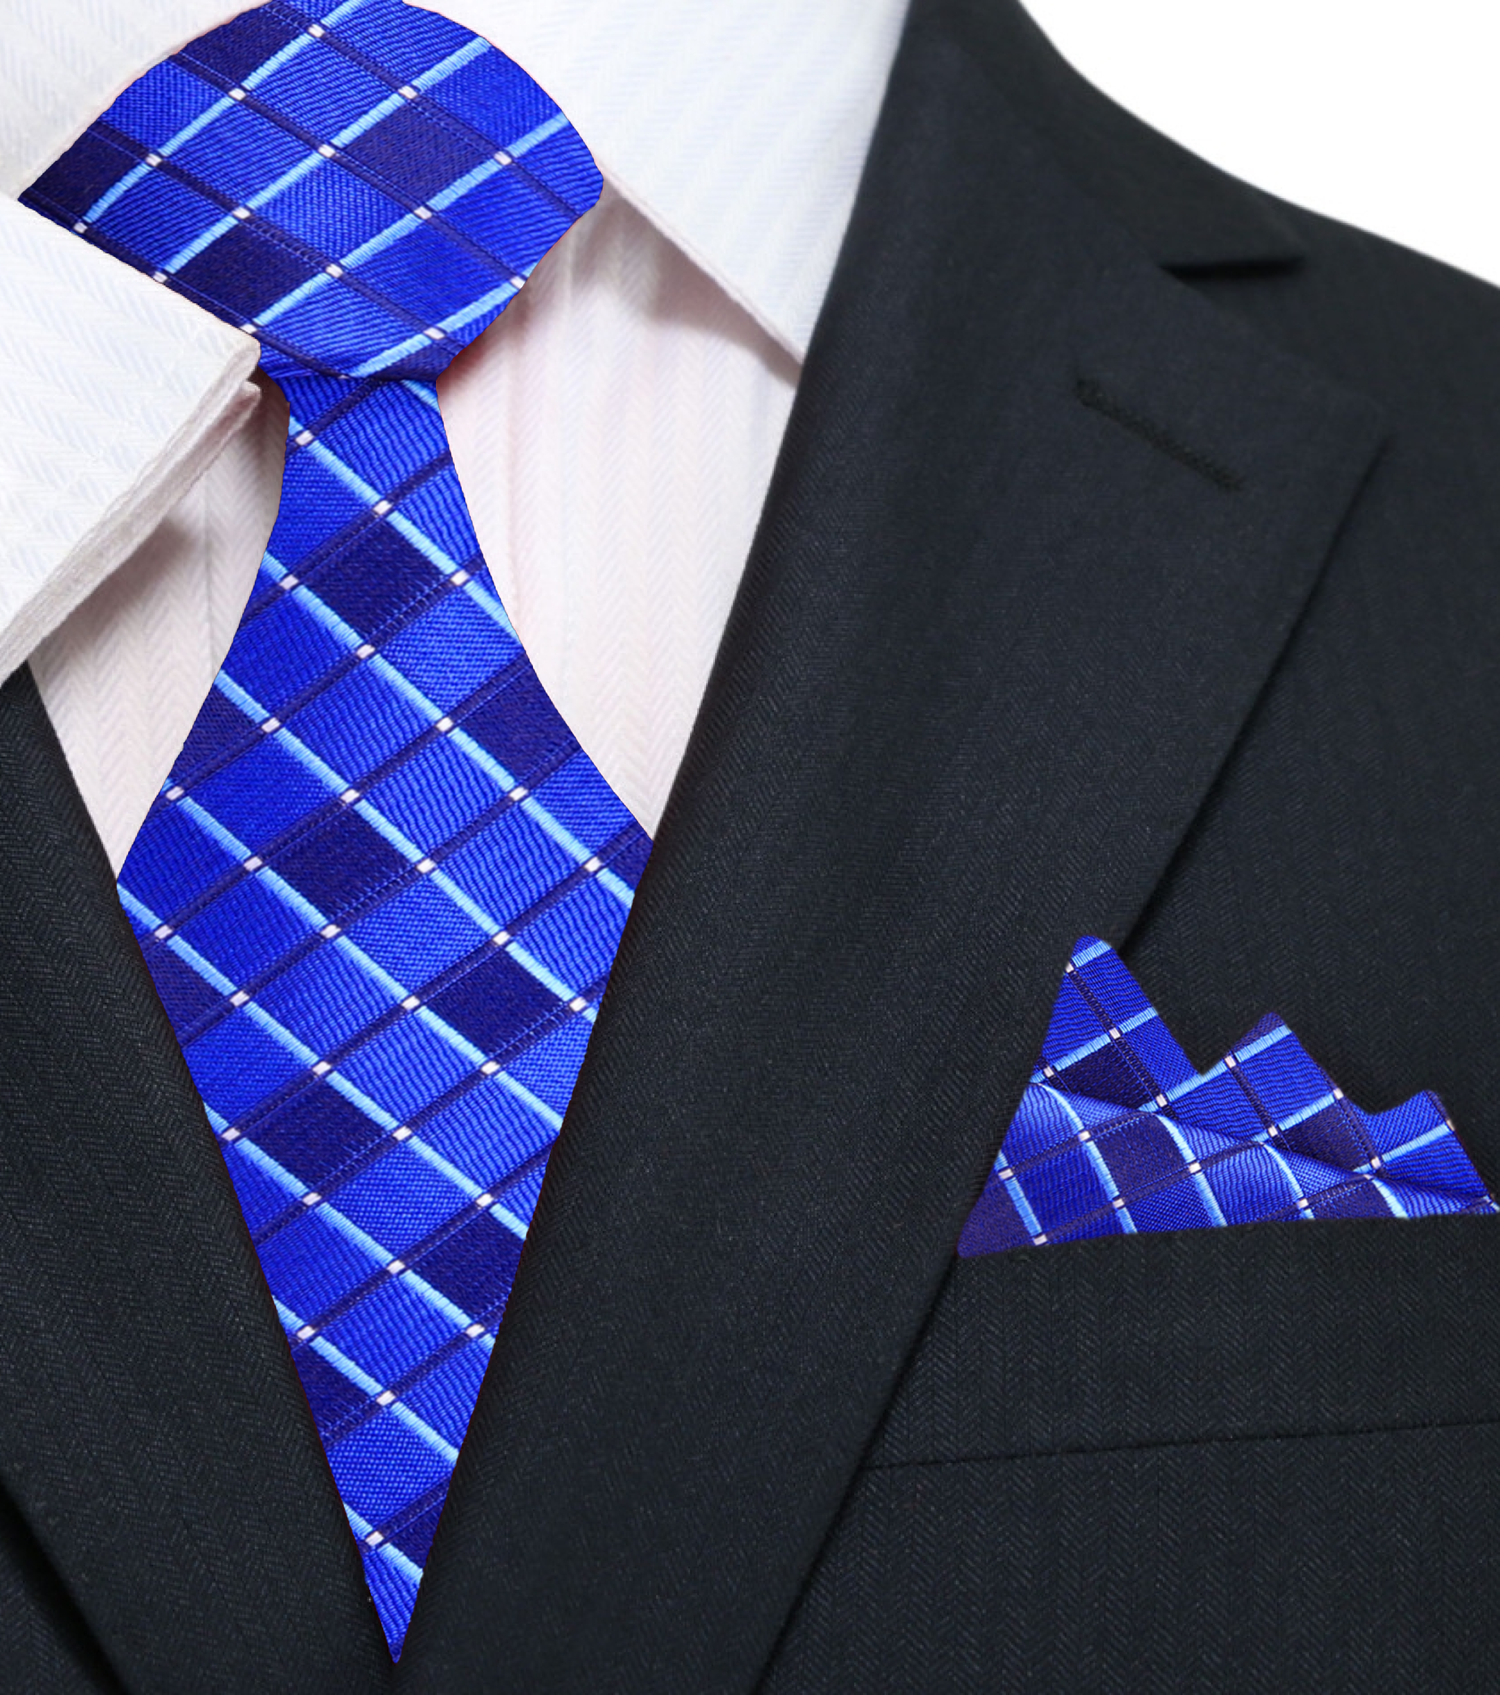 Shades of Blue Geometric Tie and Pocket Square